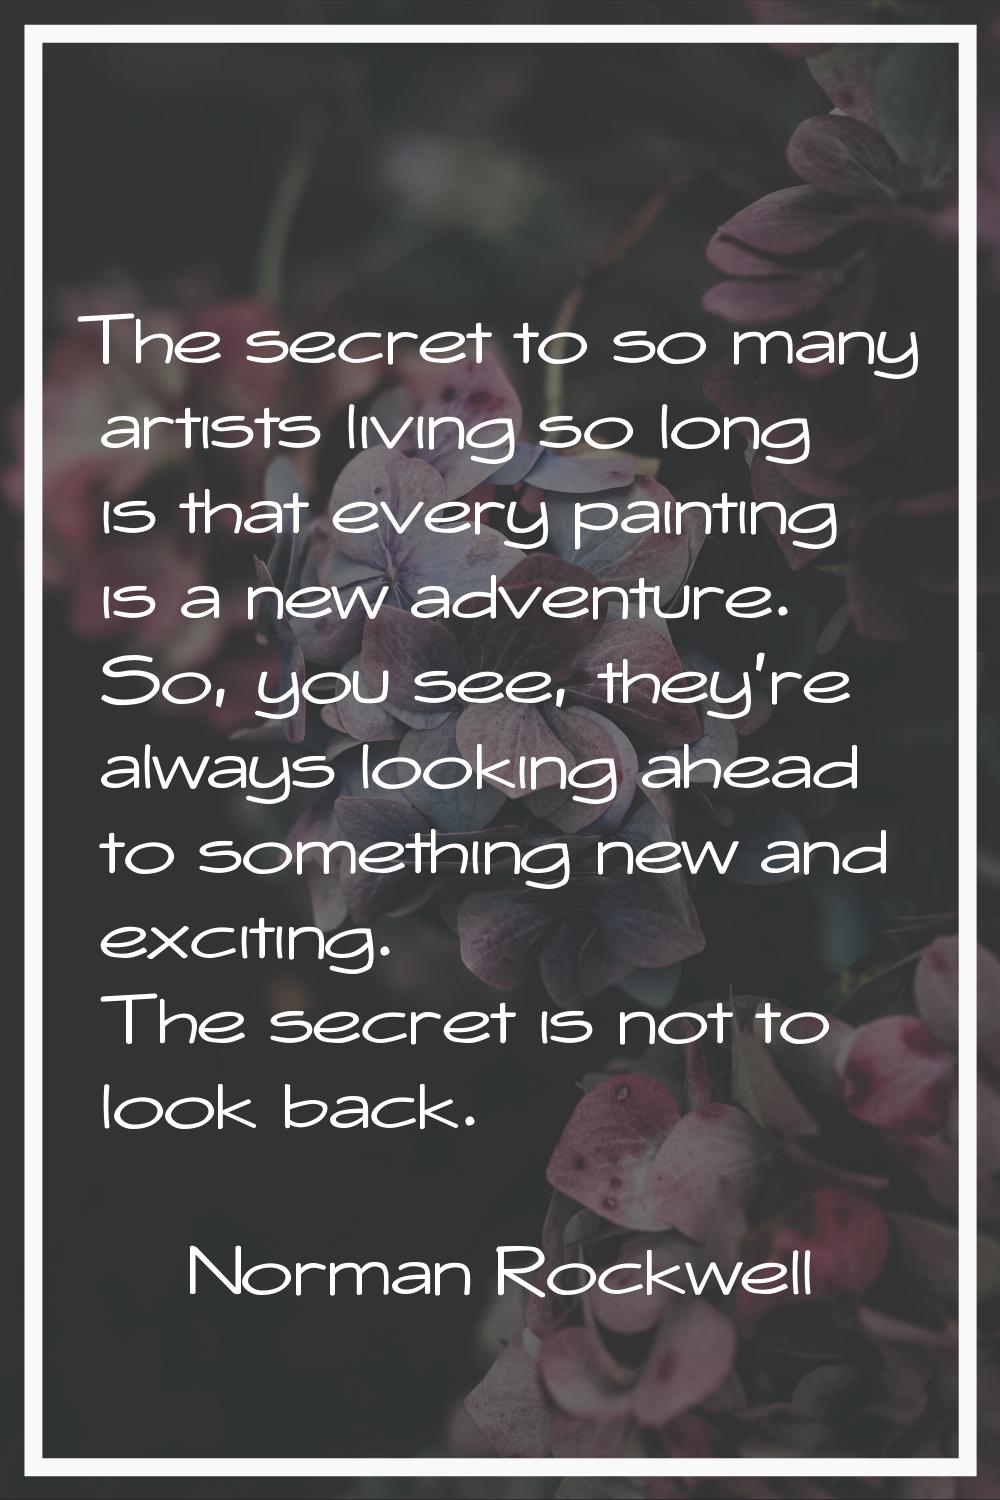 The secret to so many artists living so long is that every painting is a new adventure. So, you see